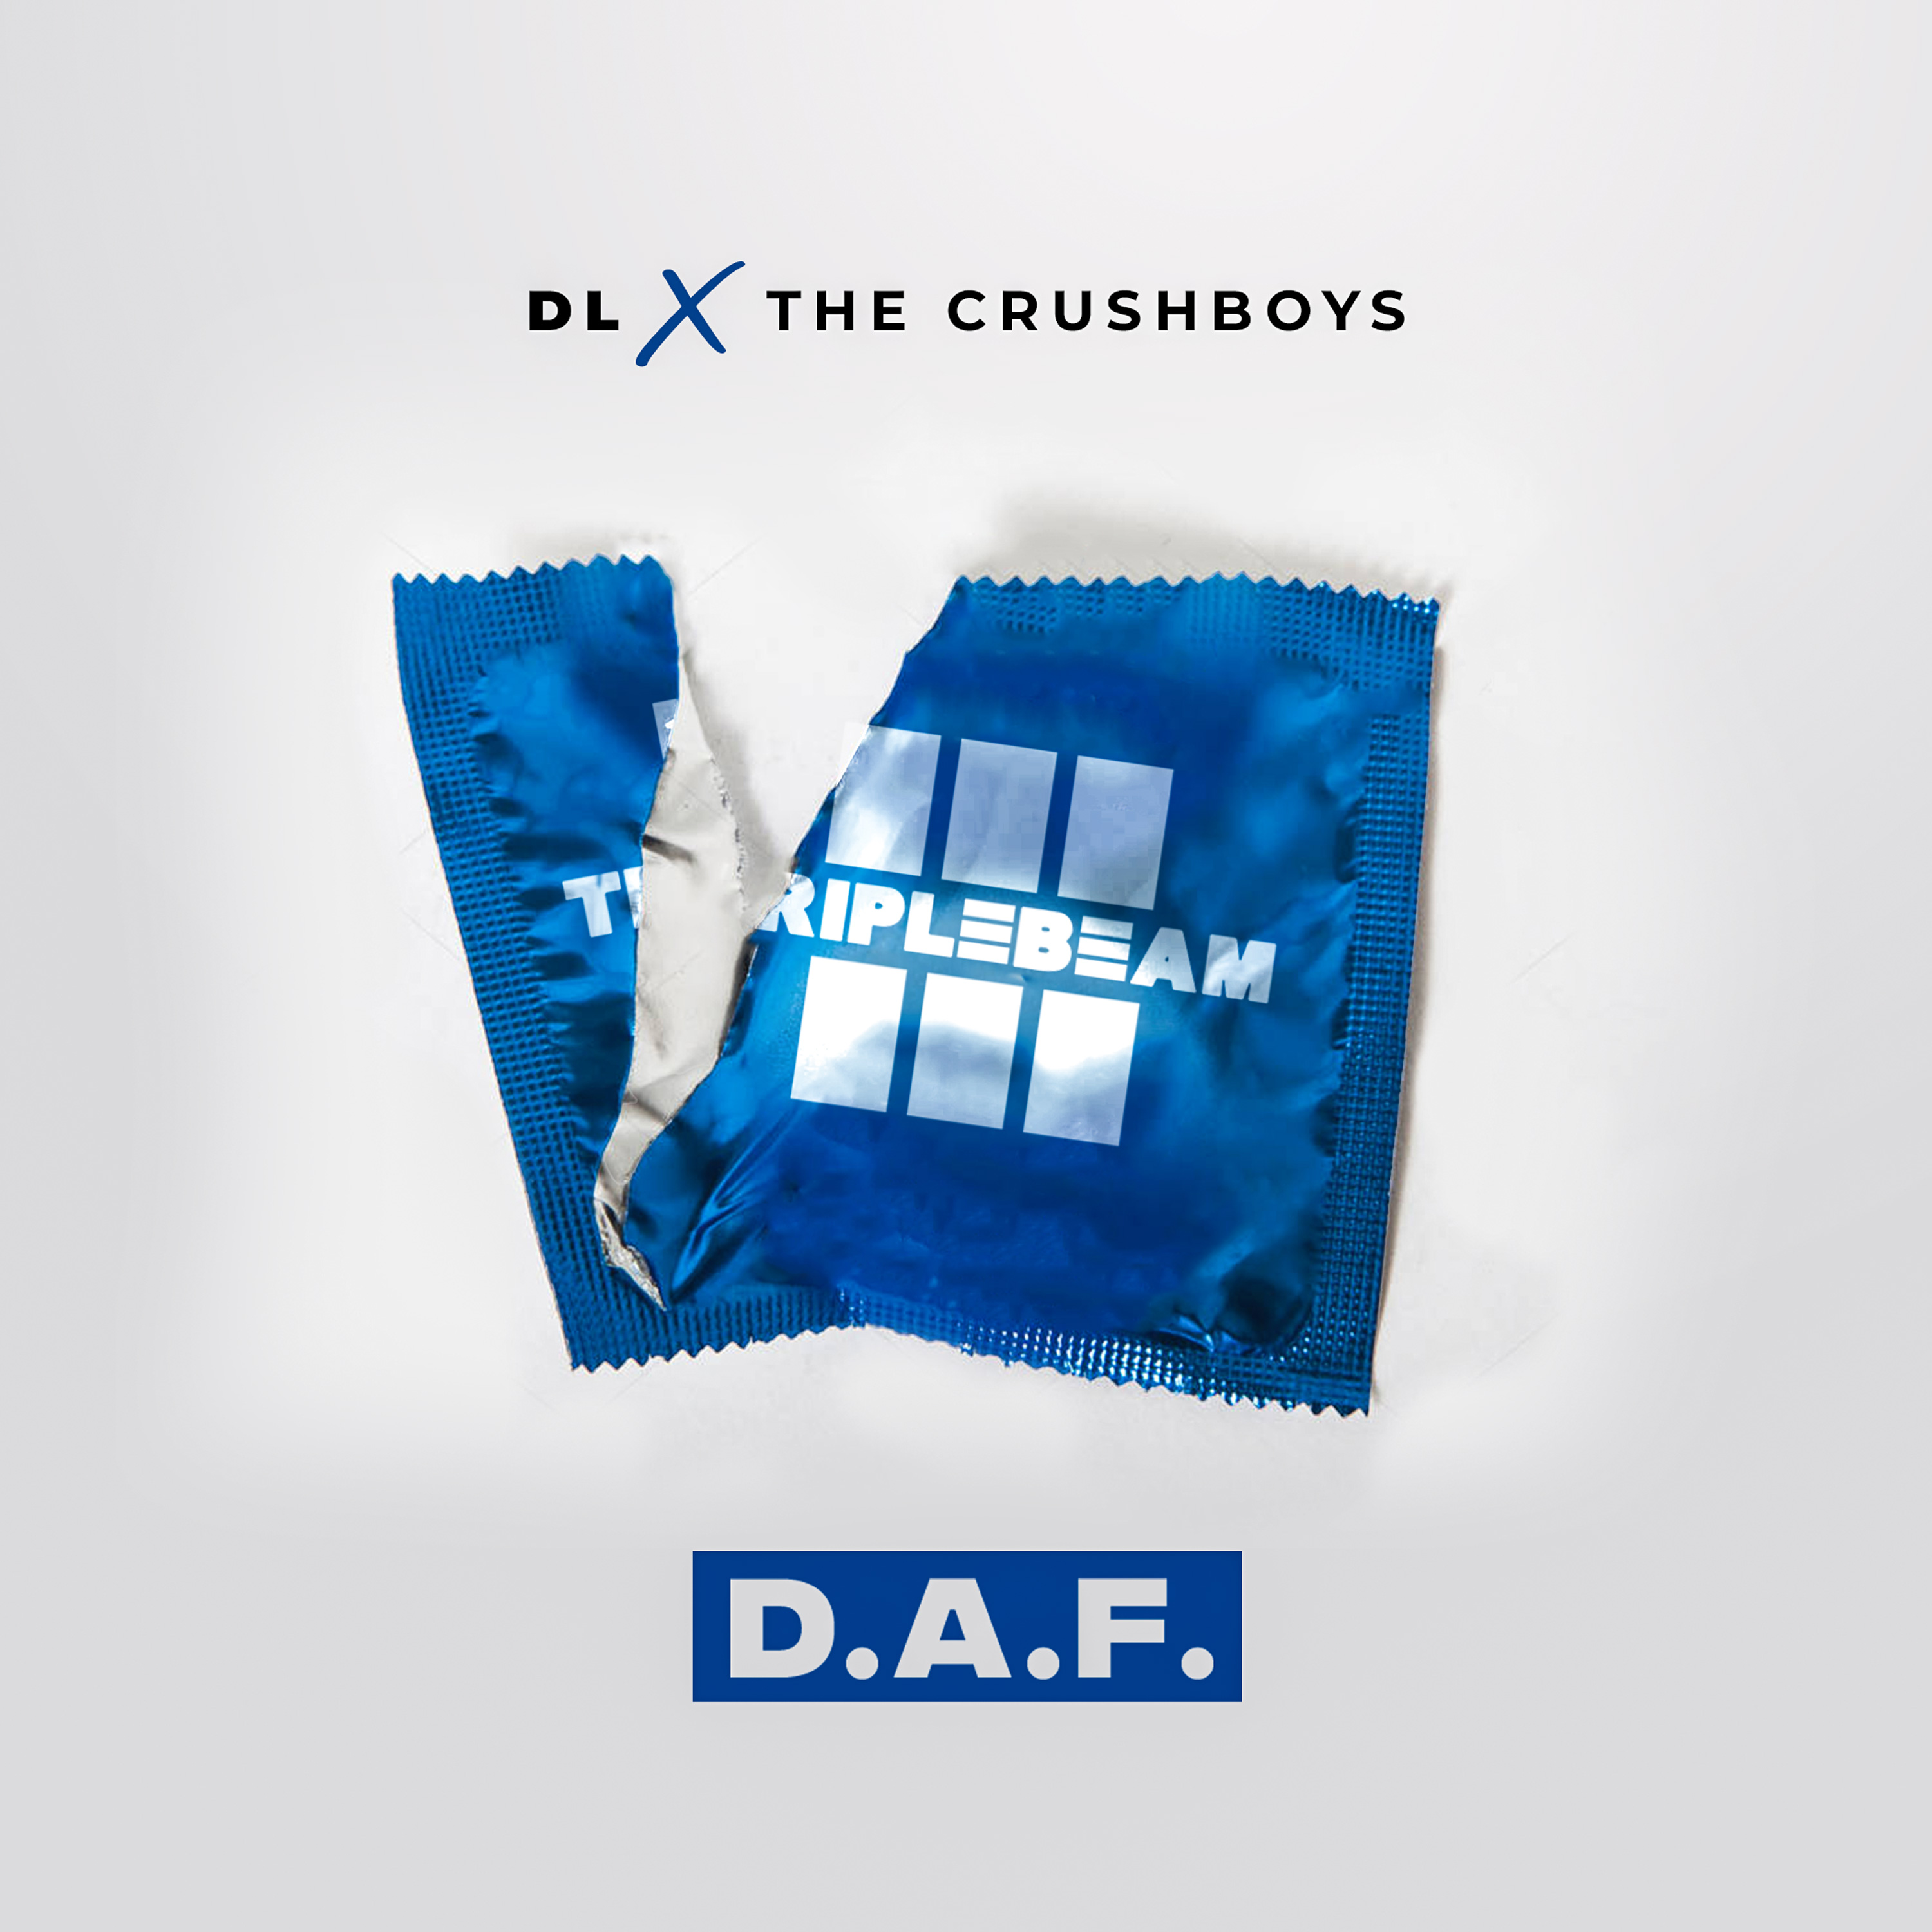 Art for D.A.F. by DL ft. The Crushboys